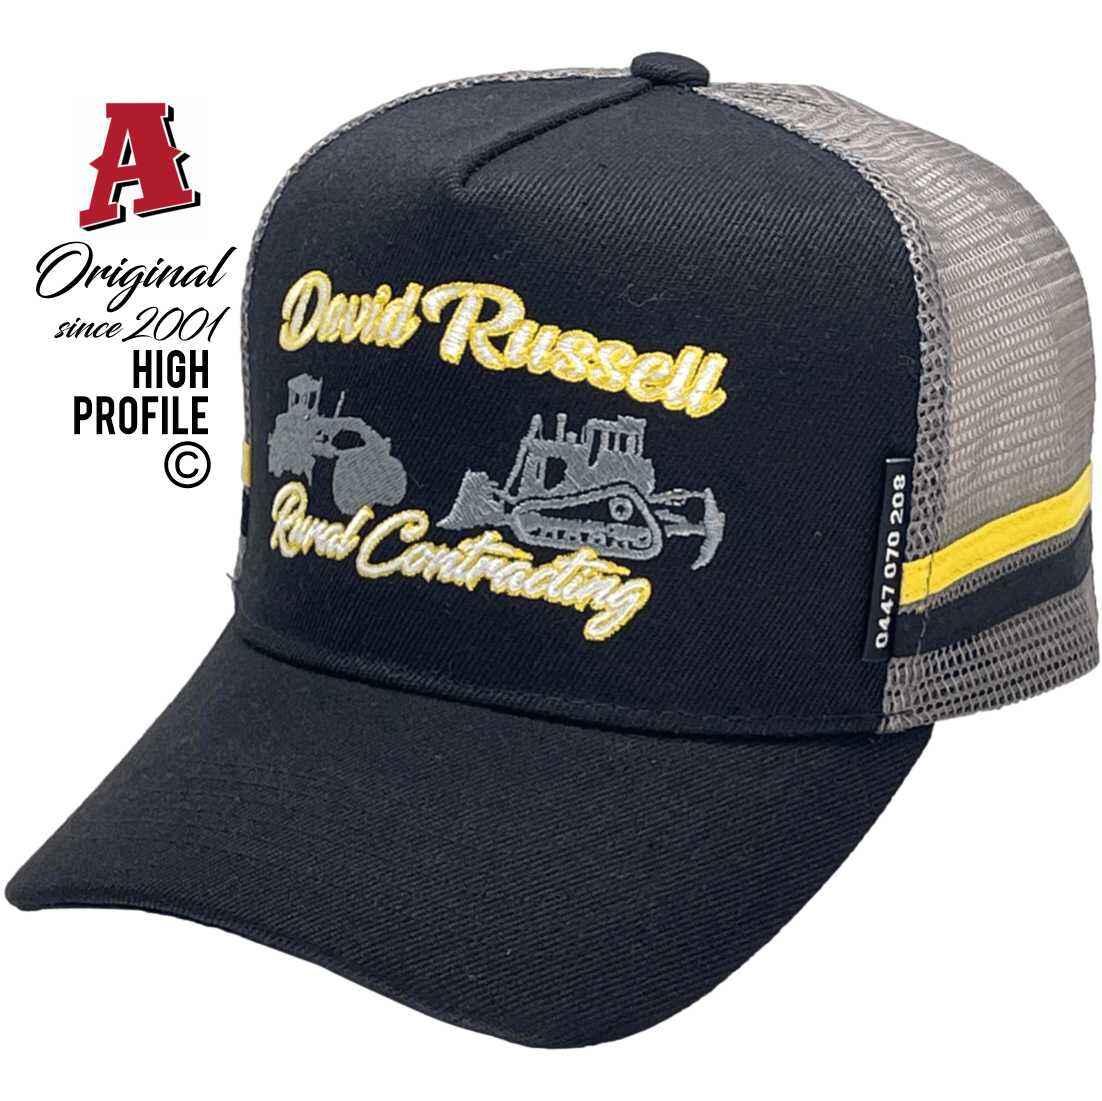 David Russell Rural Contracting Augathella Qld Basic Aussie Trucker Hats with Double Side Bands Black Grey Snapback